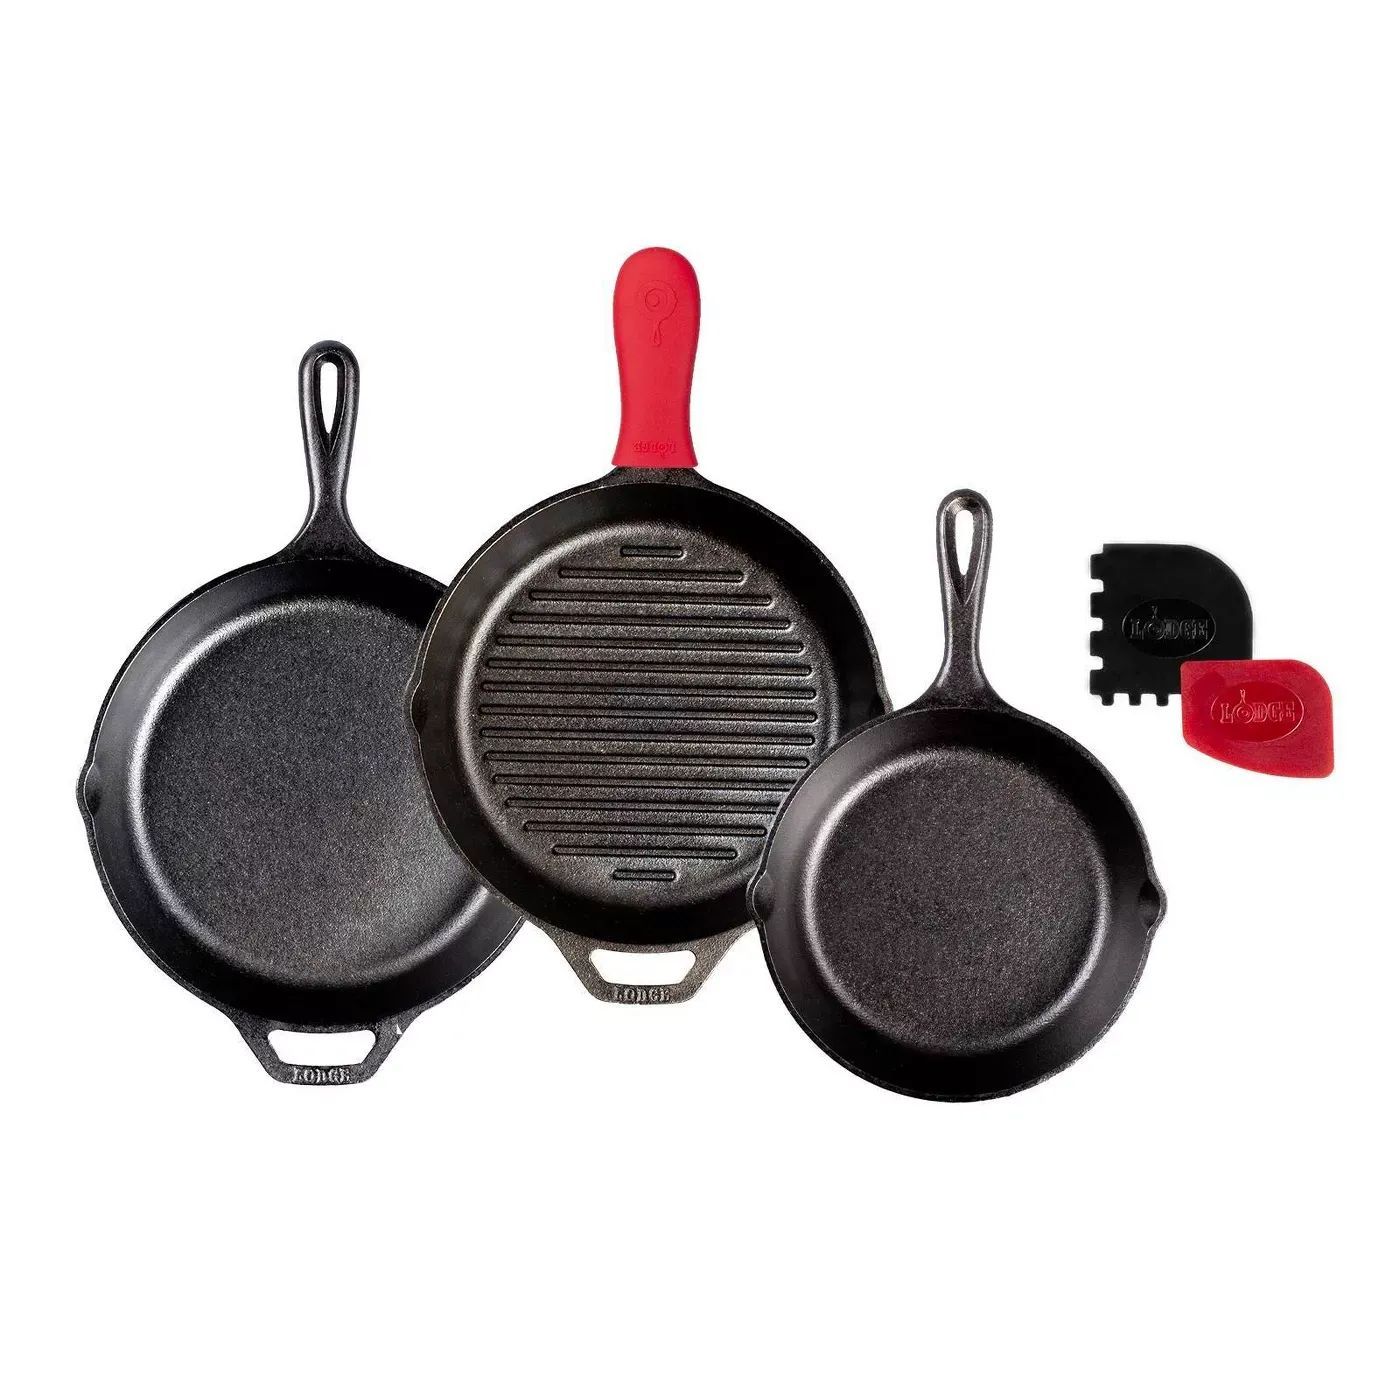 Lodge Seasoned Cast Iron 6-Piece Starter Set with large skillet, small skillet, skillet with ridges and a red helper handle and two other helper handles